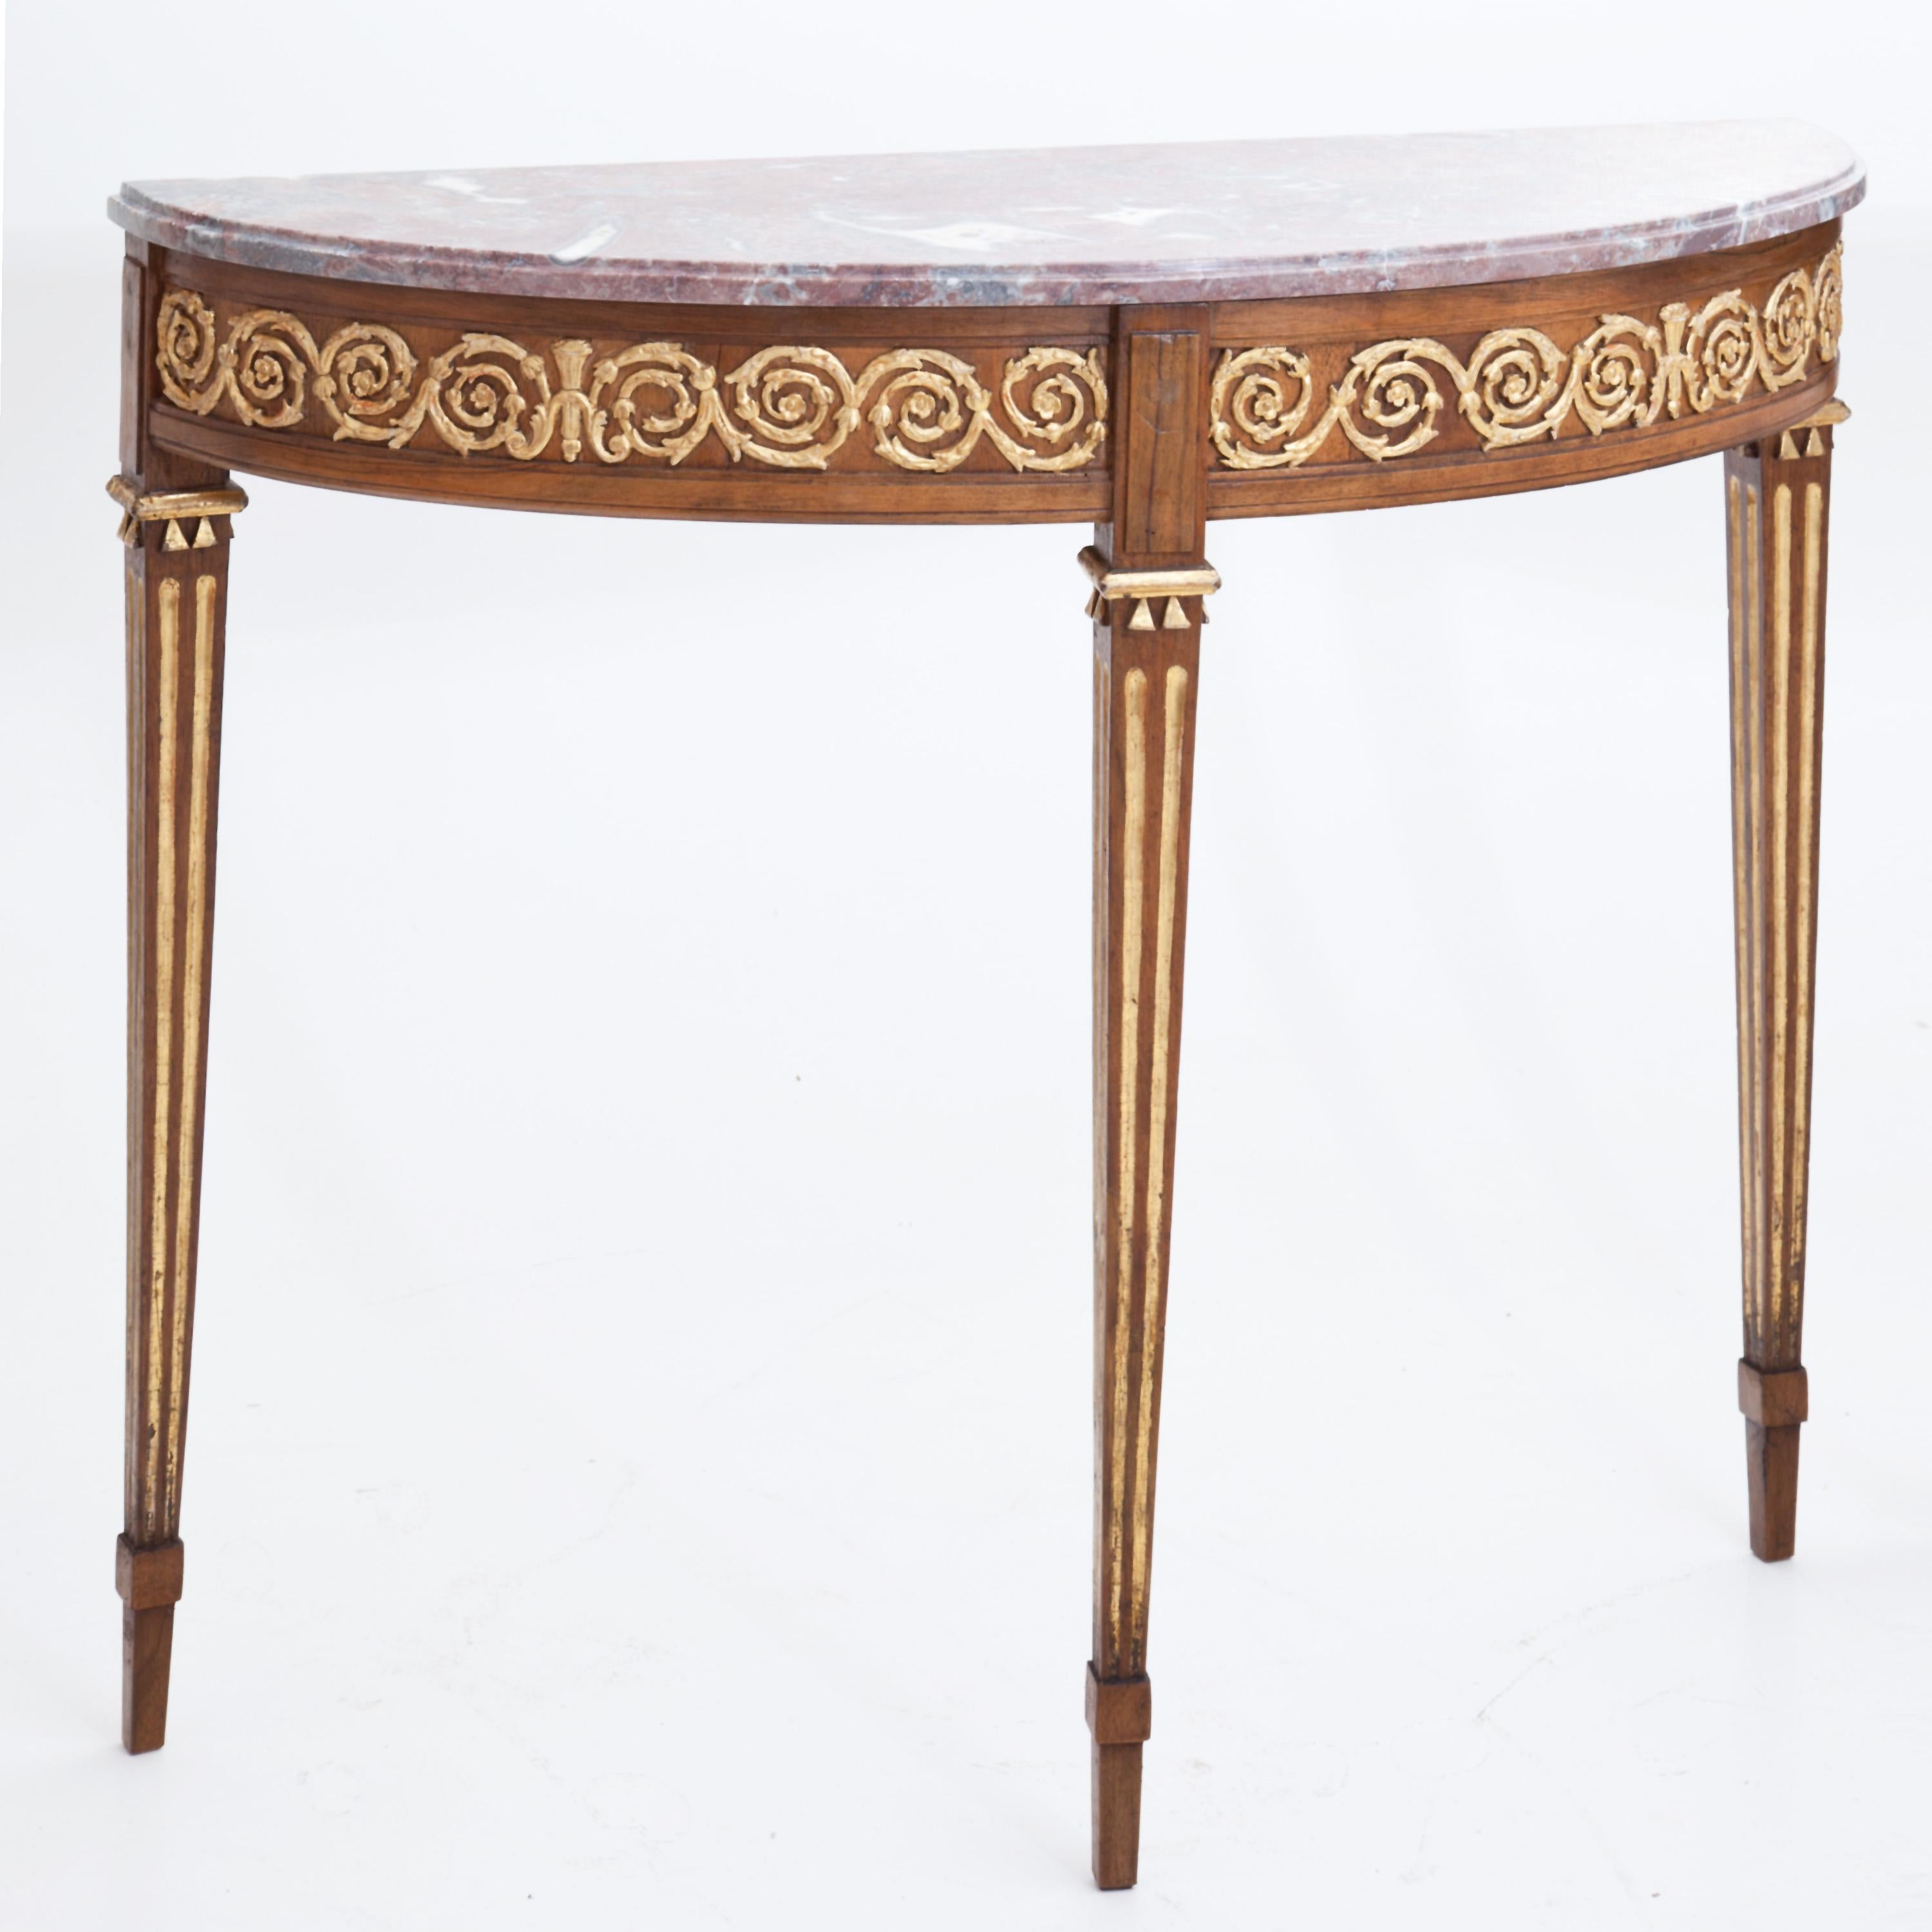 Louis XVI Pair of Redesigned 18th Century Demilune Consoles with Marble Tops 21st Century